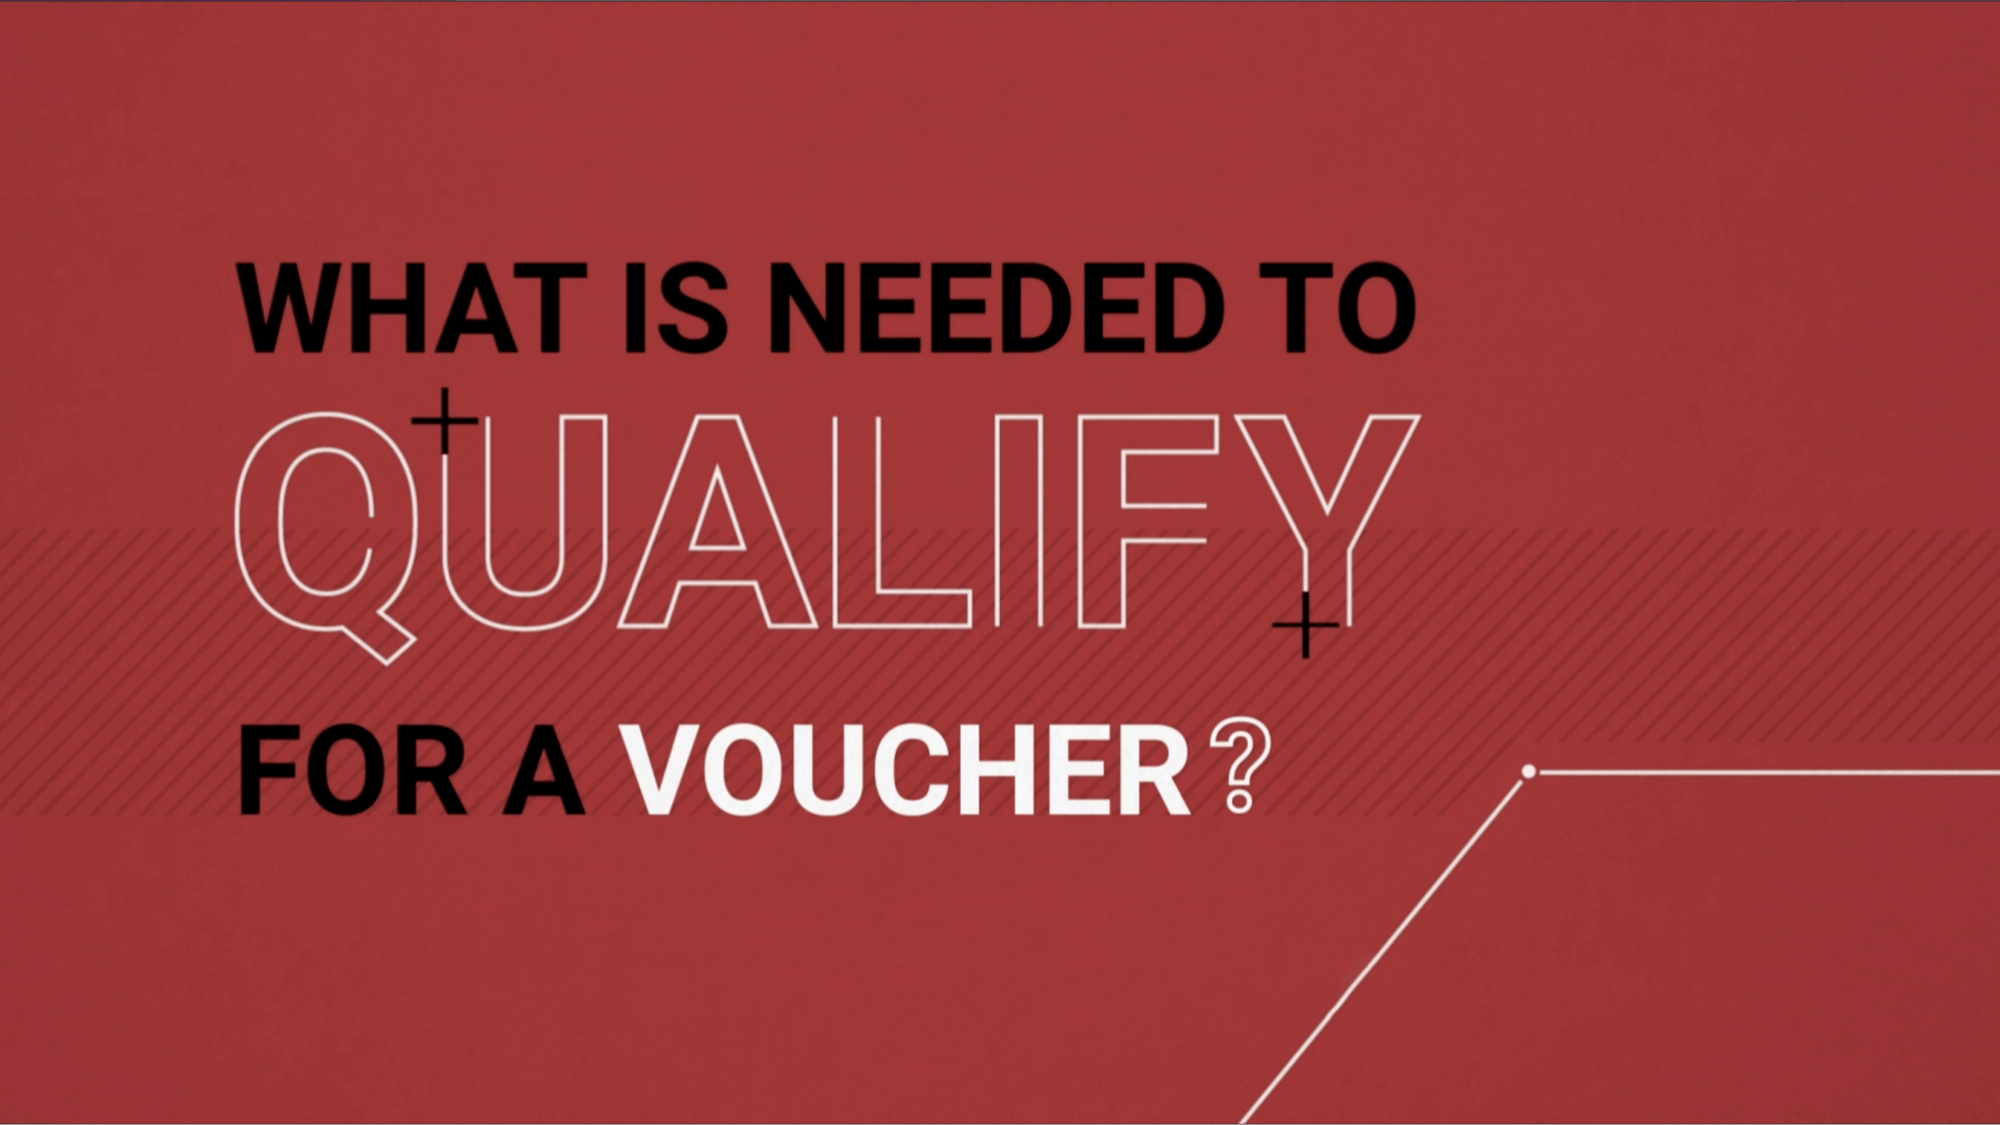 What's needed to qualify for a voucher?